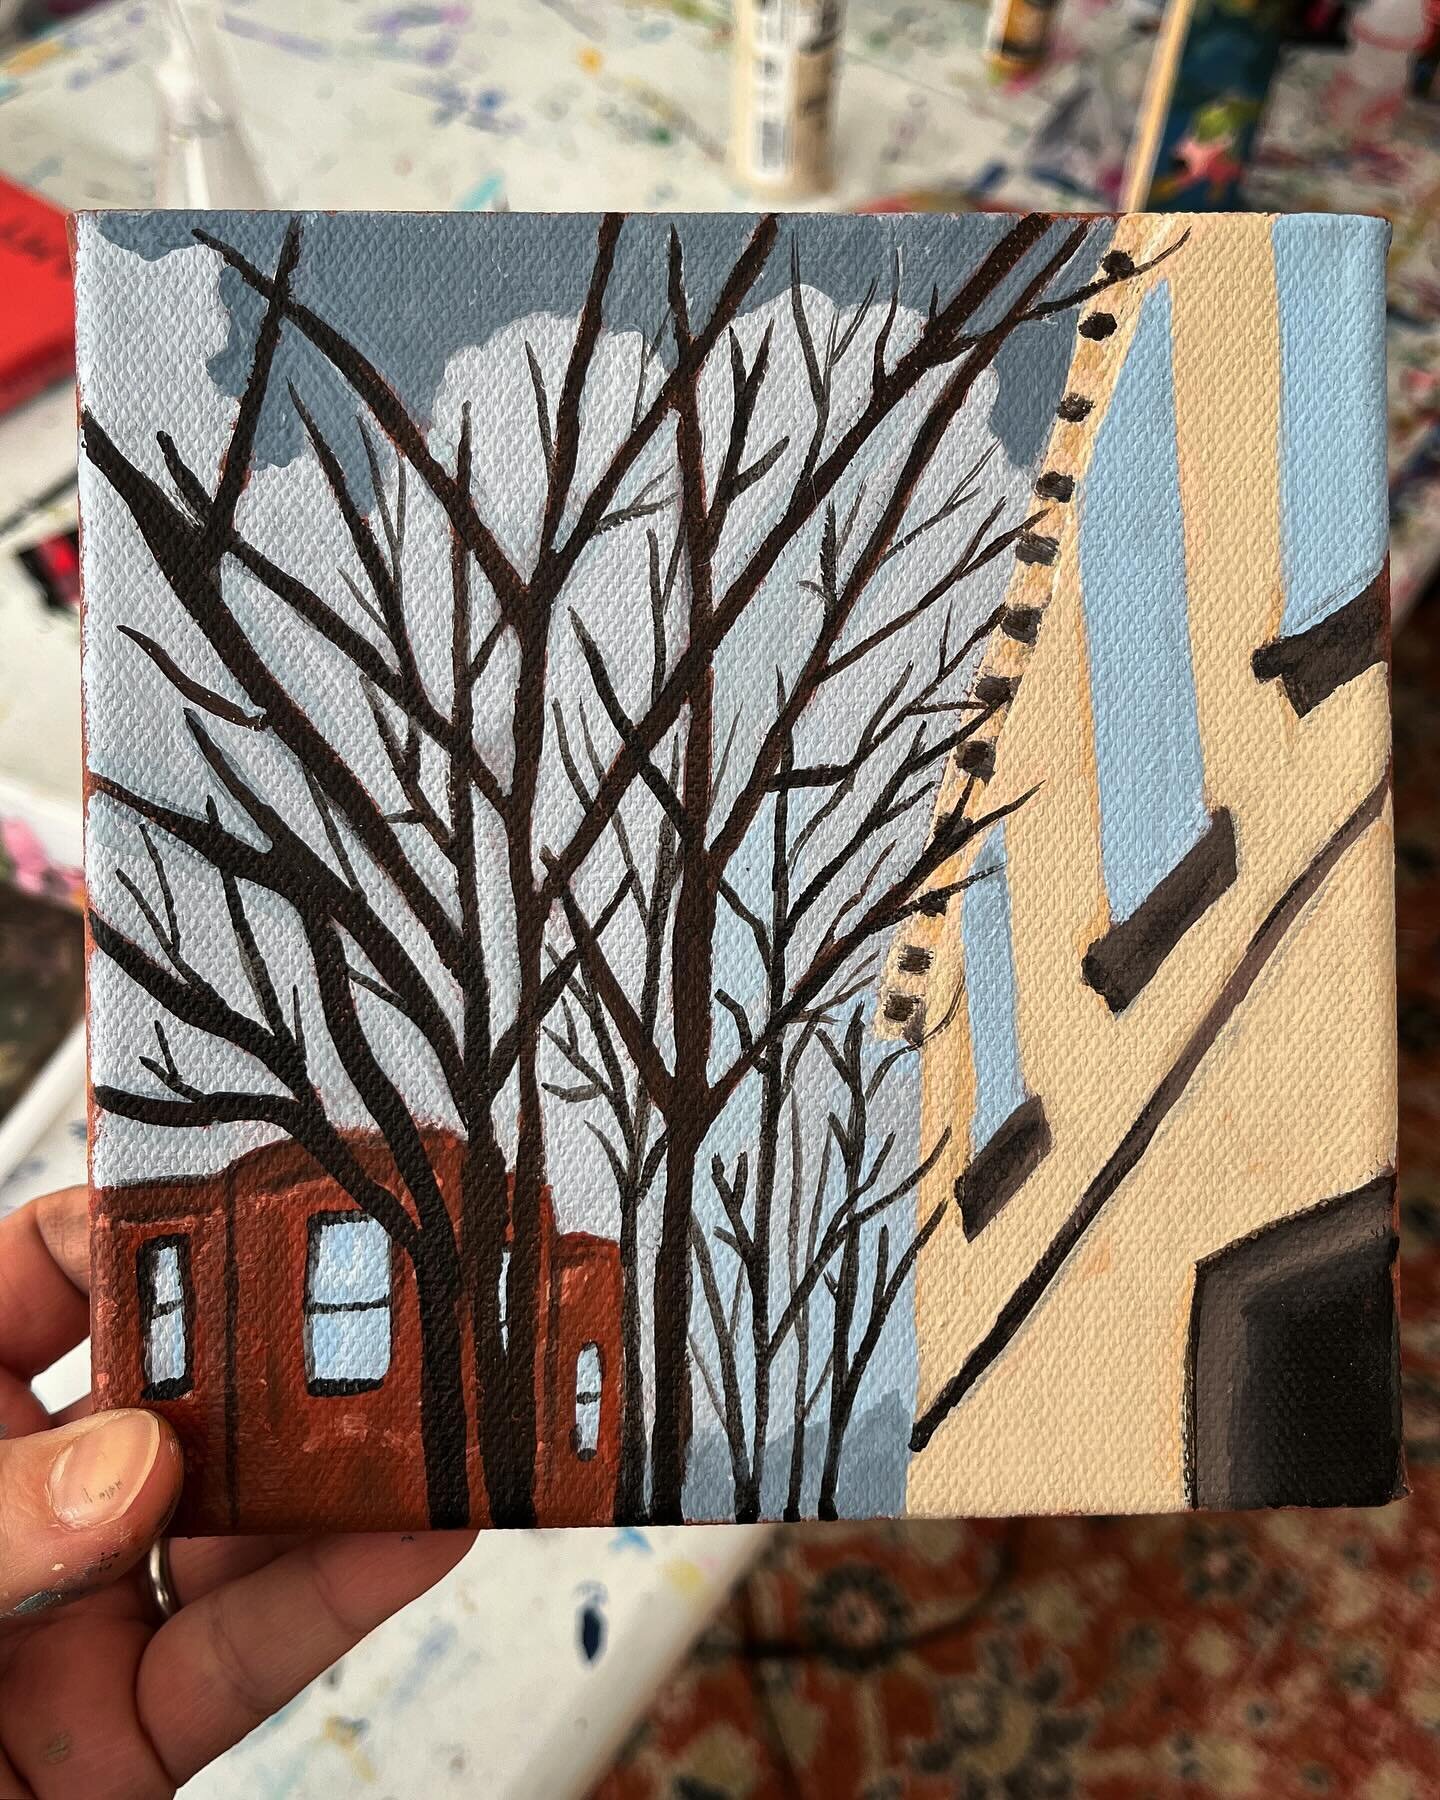 Winter in the city, on this sweet little 4x4 canvas 

✨